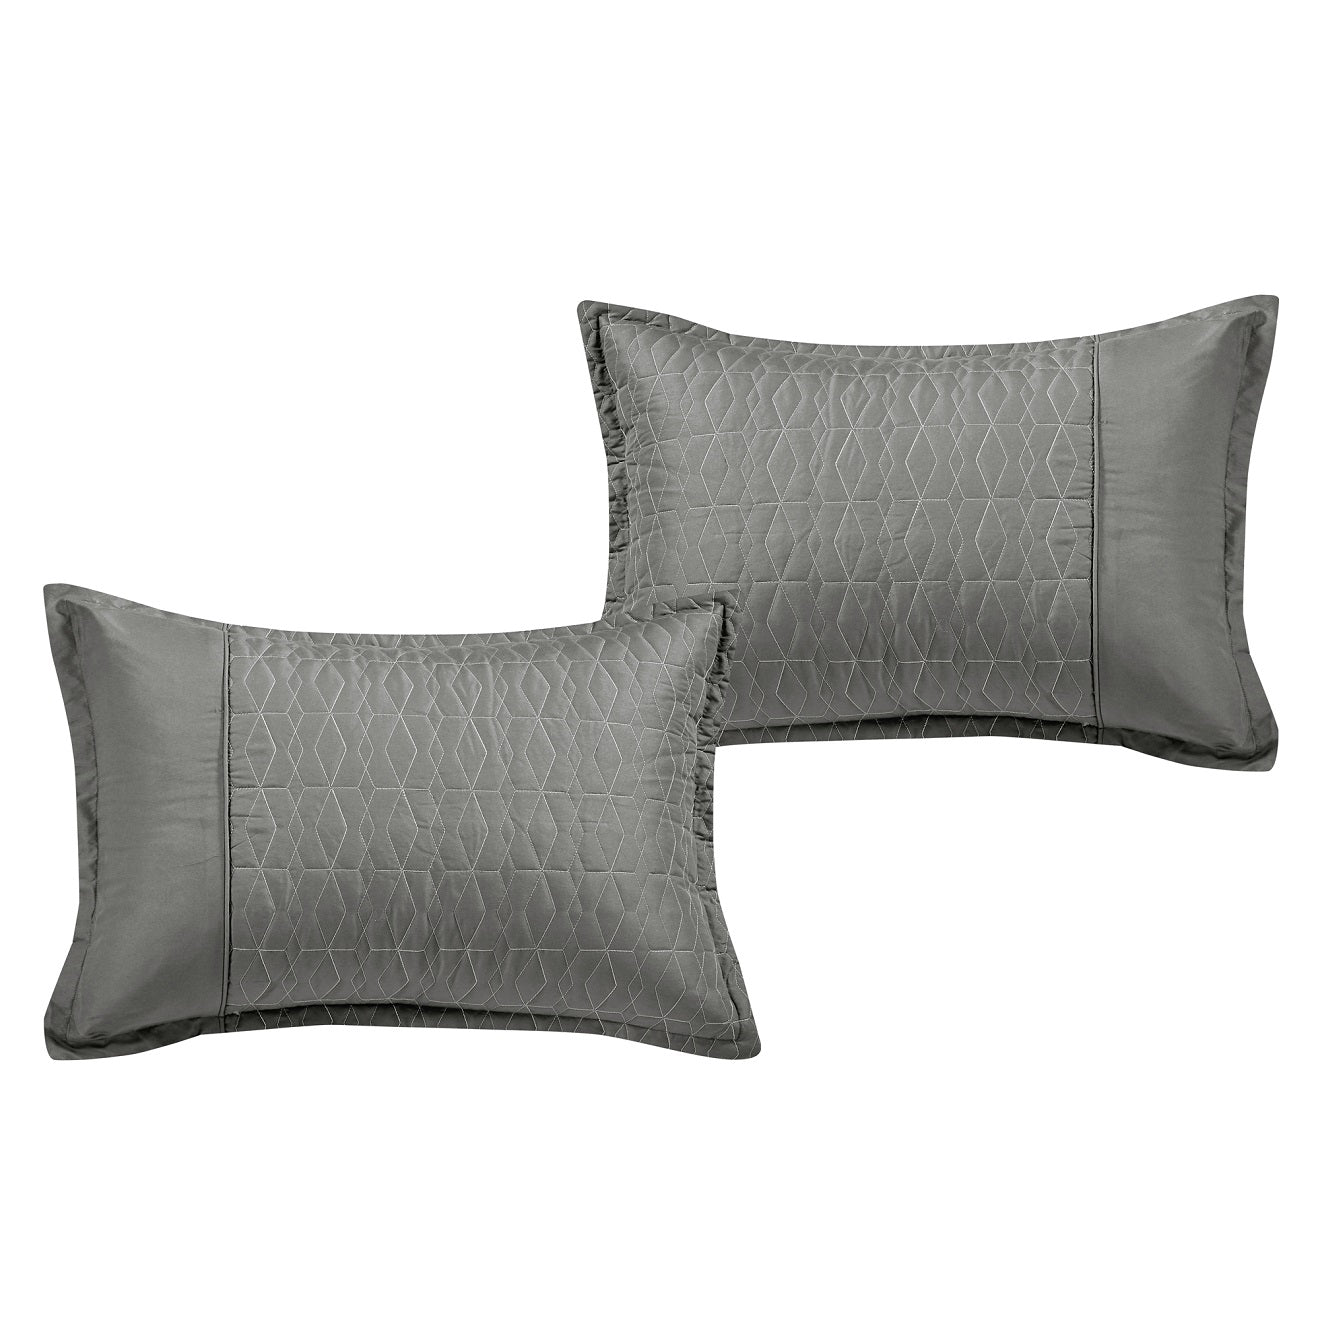 close up of the pillows that are meant for sleeping on in the 7 piece gray comforter set